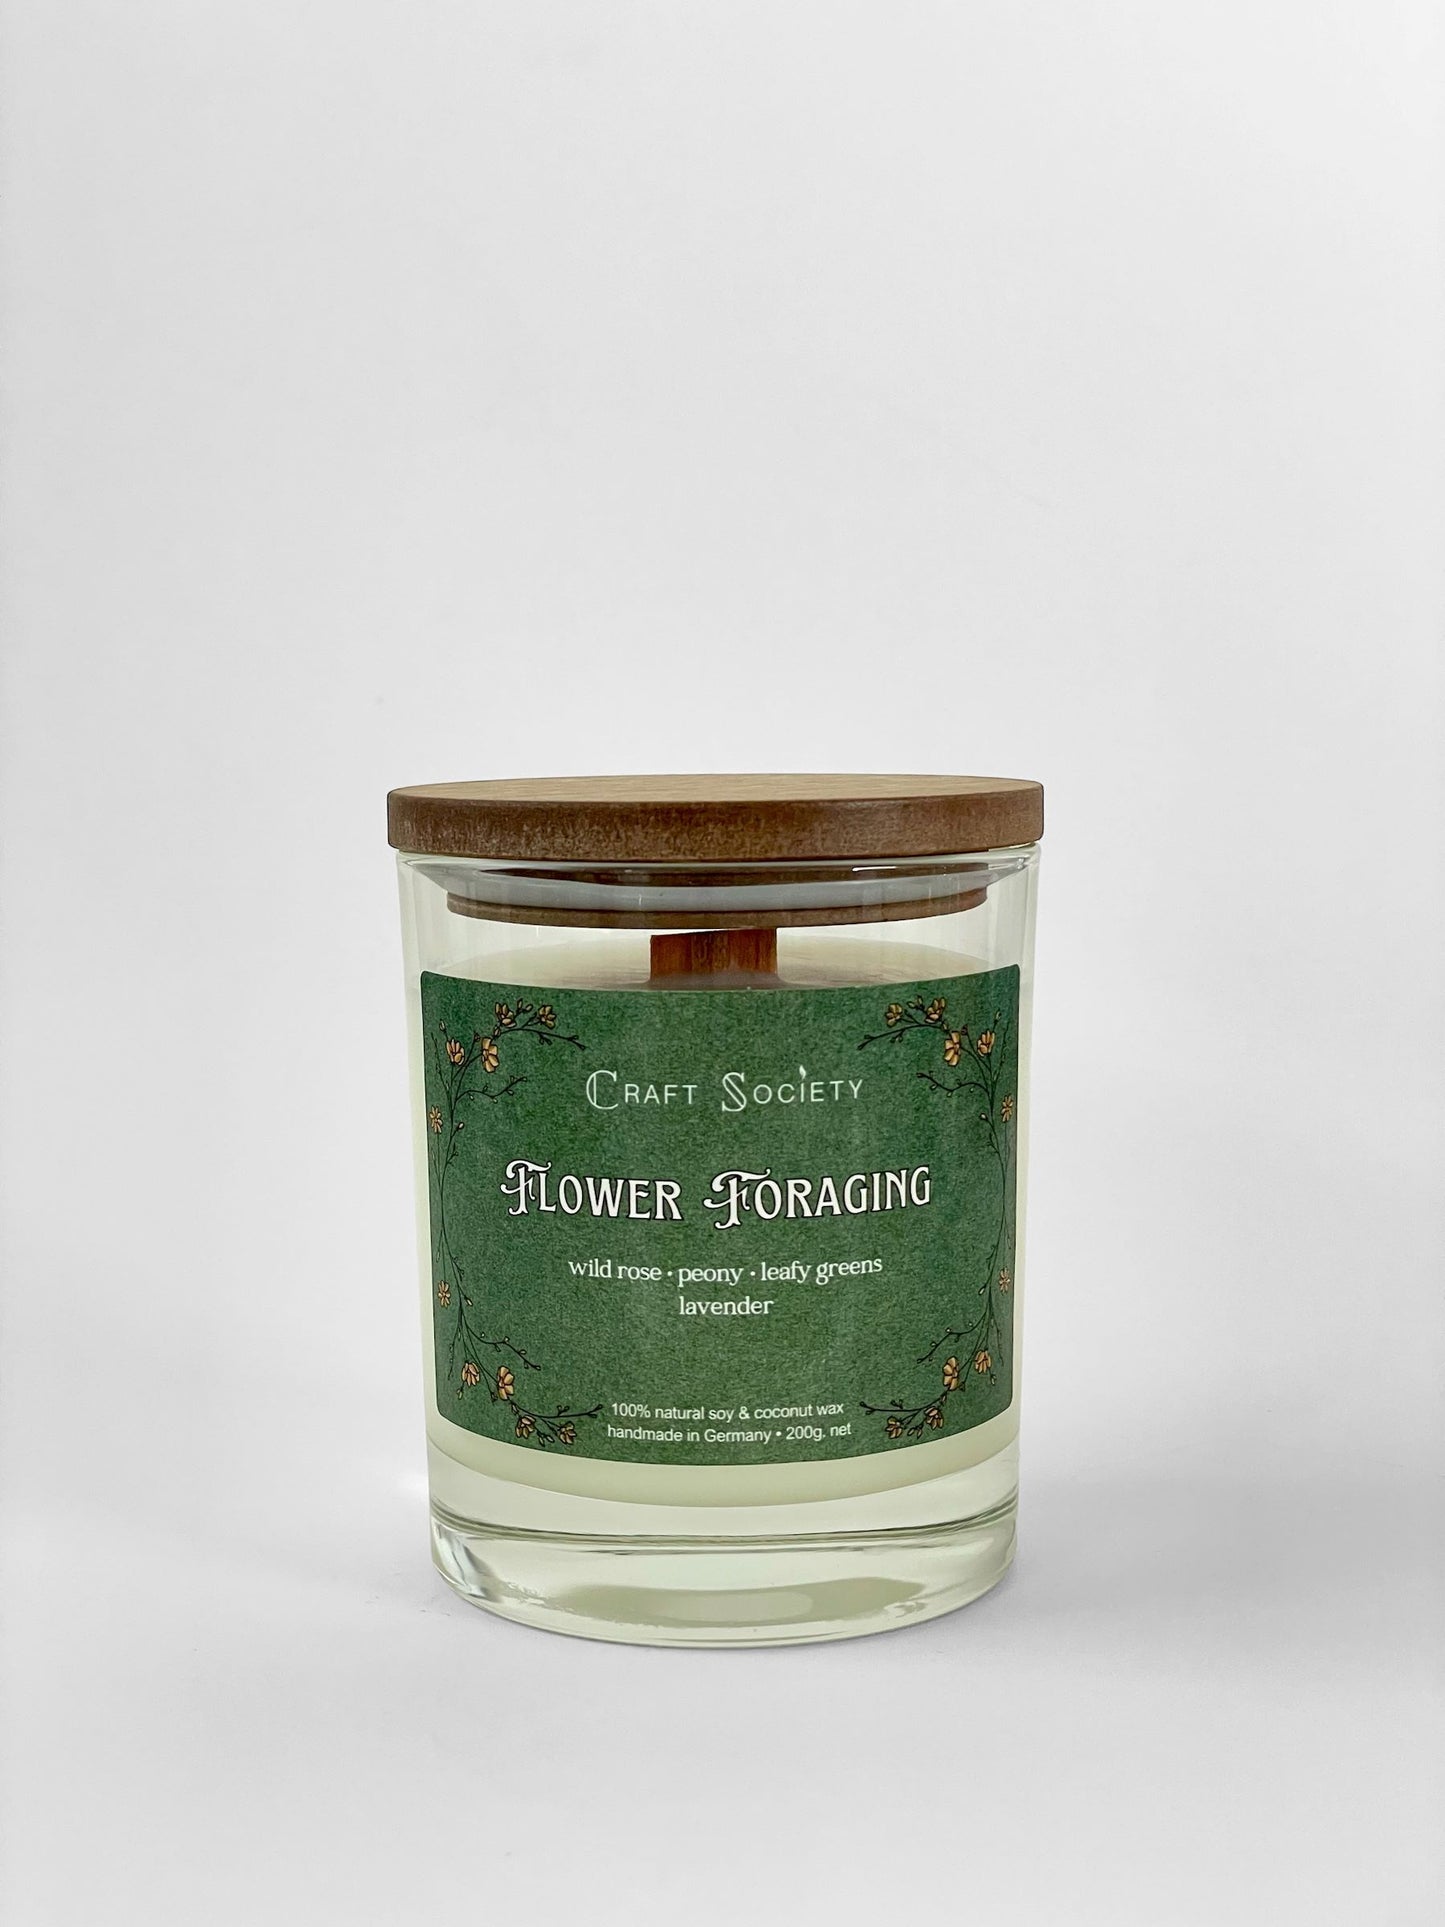 A scented candle called Flower Foraging on a white background, boxed, clear glass jar, deluxe version with wooden wick